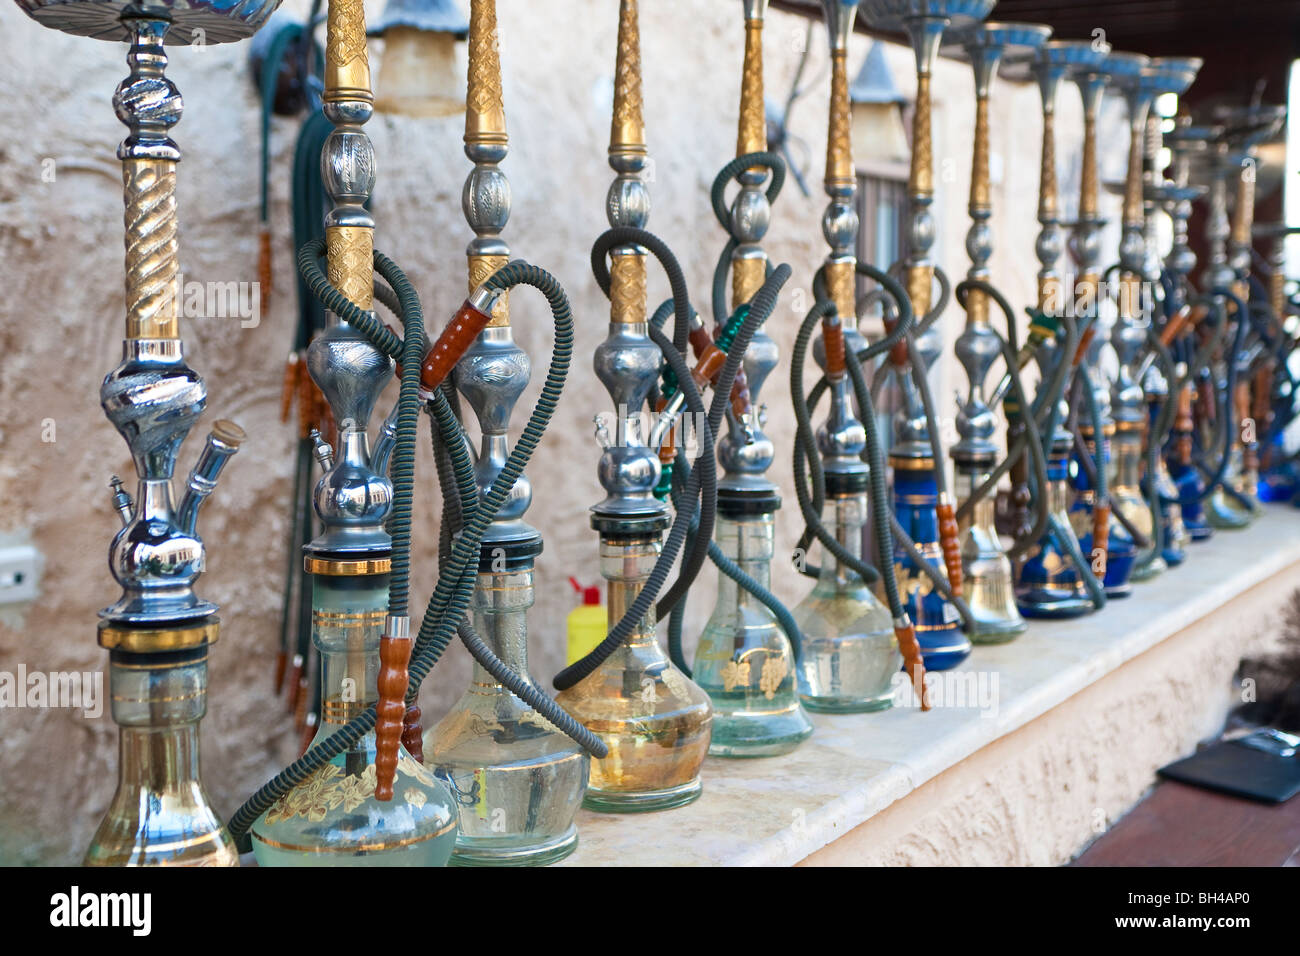 Arabic shisha, sometimes called hookah, waterpipes lined up on a bar for customers in a restaurant in an Arabic country. Stock Photo